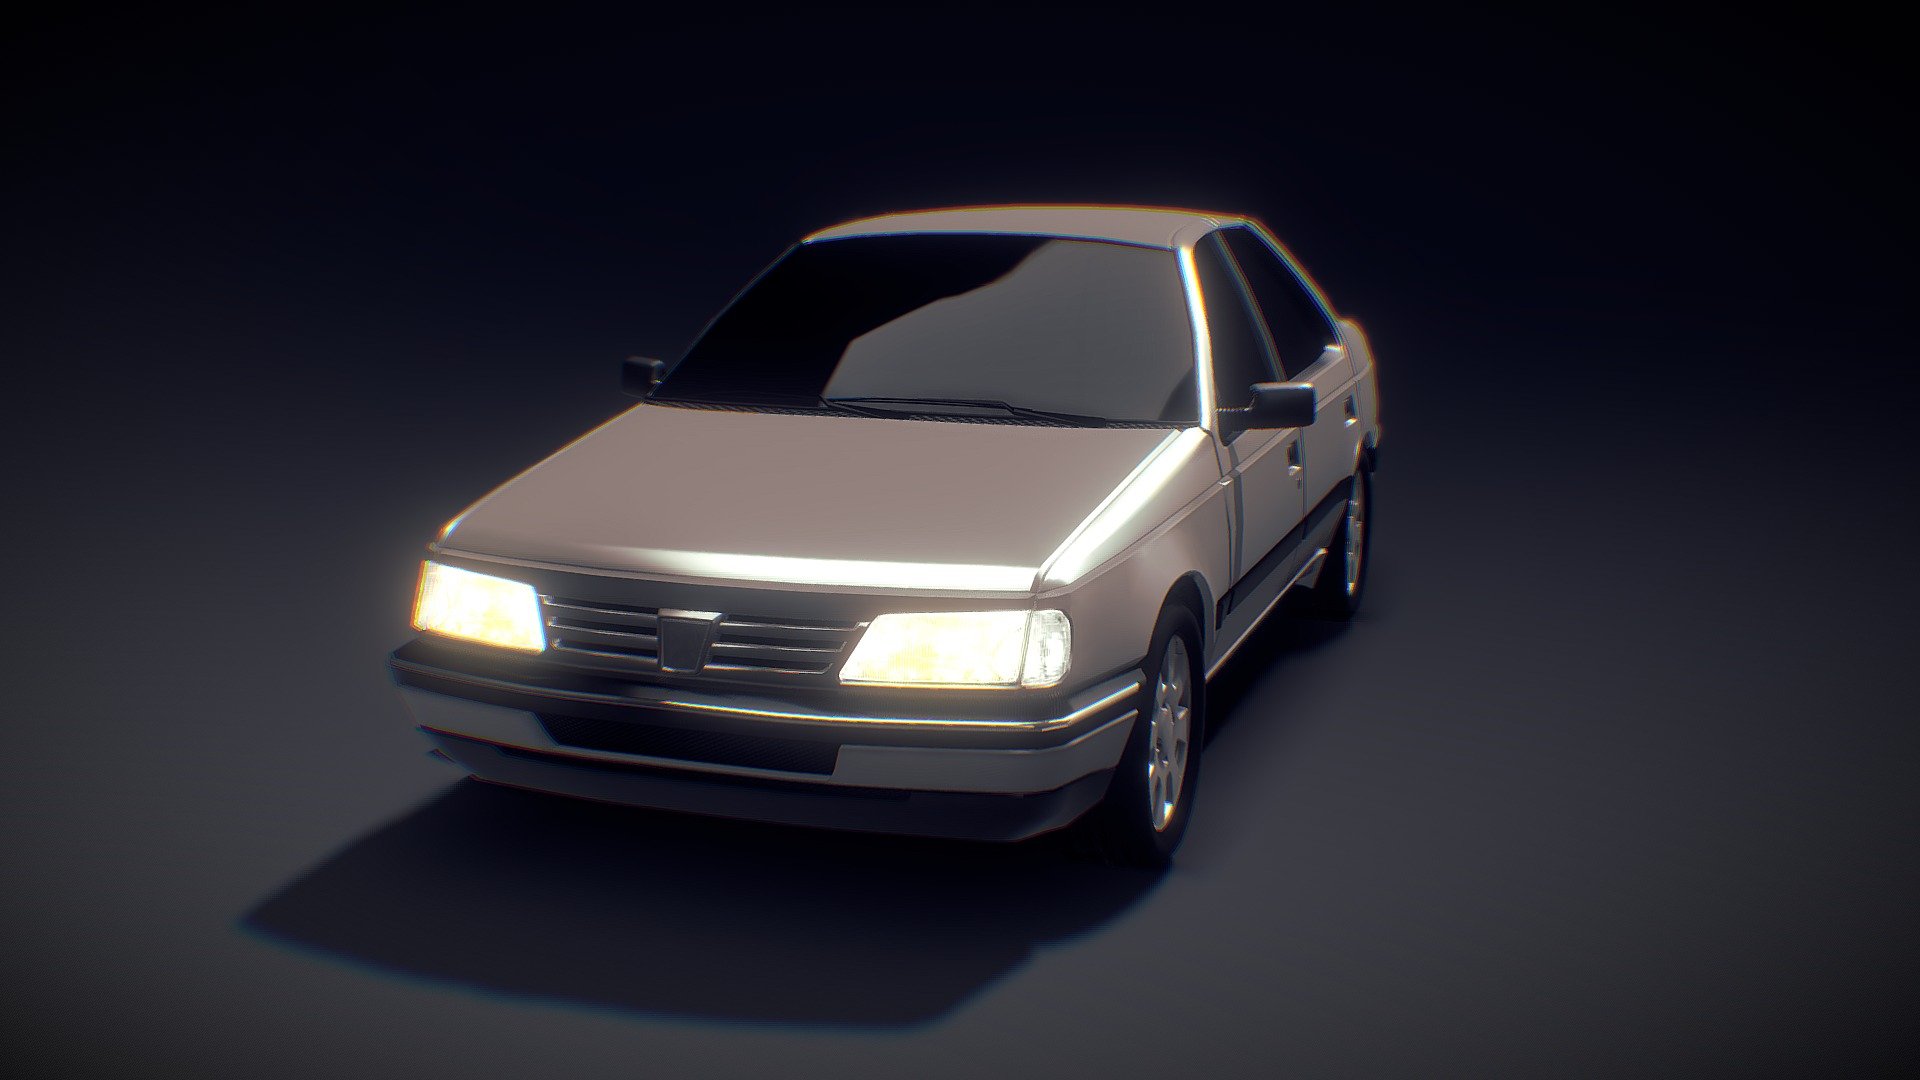 The Peugeot 405 is a large family car designed by Pininfarina and released by the French automaker Peugeot in July 1987.
It's production continued to be manufactured under licence outside France,
in countries such as Argentina, Azerbaijan, Egypt or Iran.
This model is made especifically for mobile games hence the goal was to keep it's poly count and material count as low as possible. 

This model has been created using 3dsMax.

p.s. I enabled the download option, feel free to use it in your projects even commercial ones, just don't redistribute or resell the model as is. Hope you enjoy and make great things with it 👍 - 1994 Peugeot 405 GLX (facelift version) - Download Free 3D model by Mehrdad995 (@Mehrdad995GTa) 3d model